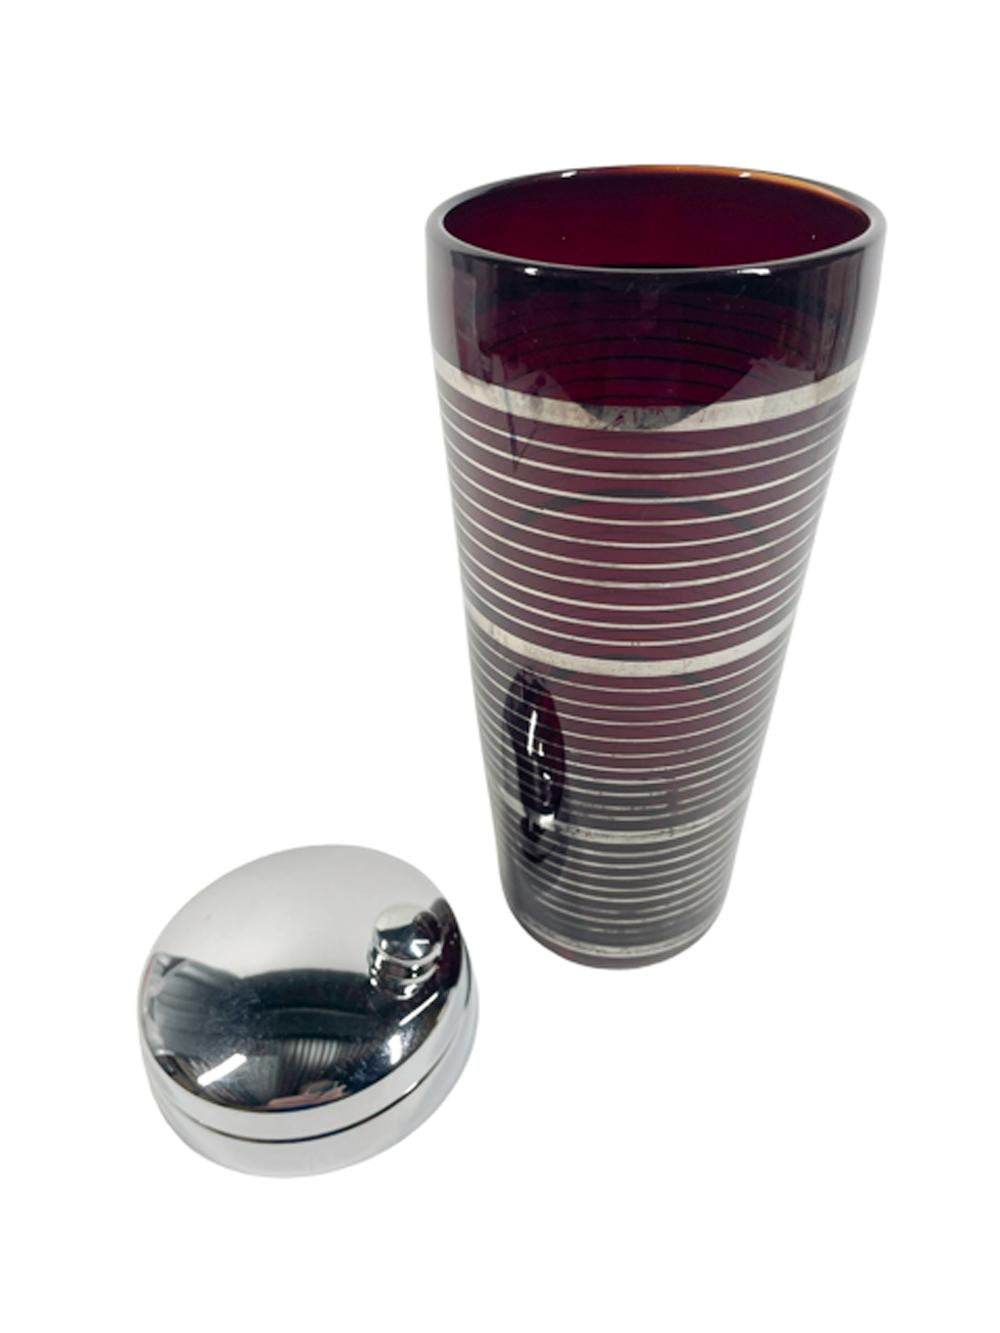 American Art Deco Paden City Glass Ruby Glass Cocktail Shaker w/Silver Bands, Chrome Lid For Sale